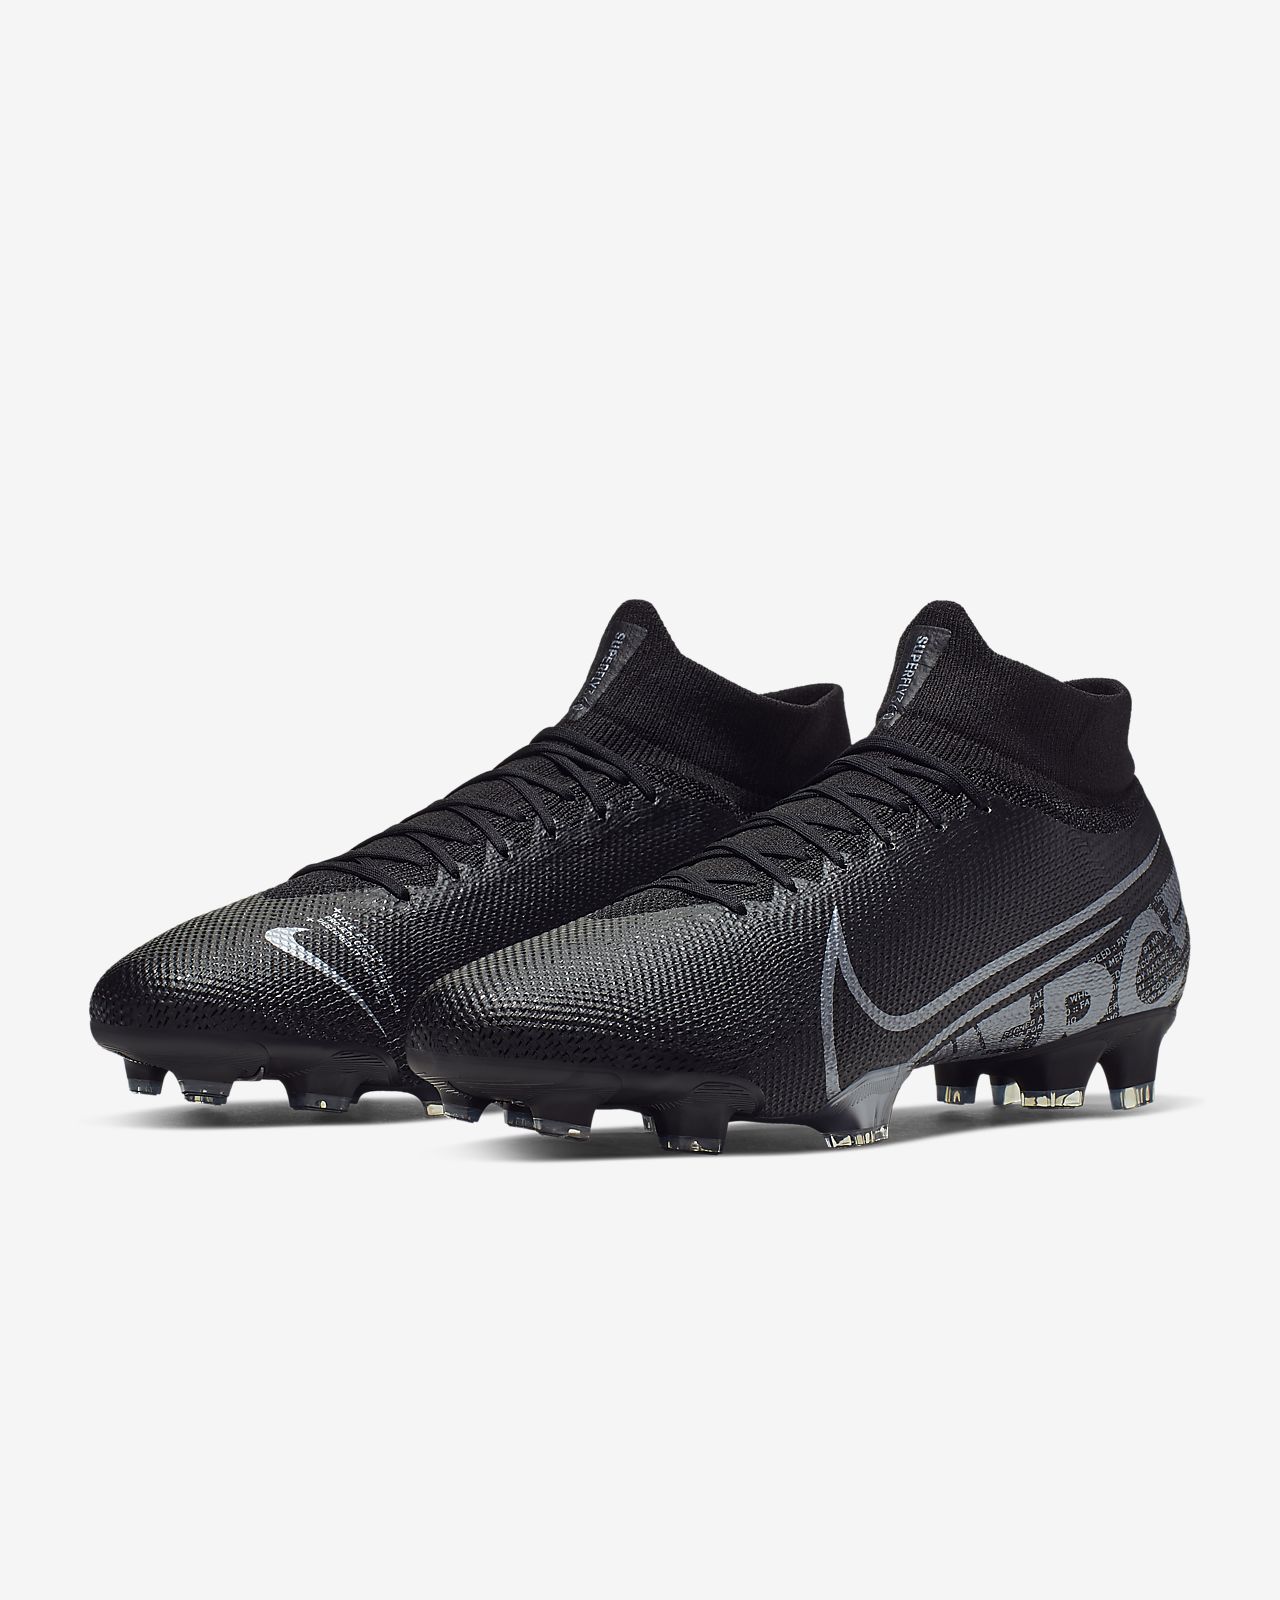 new nike superfly 219